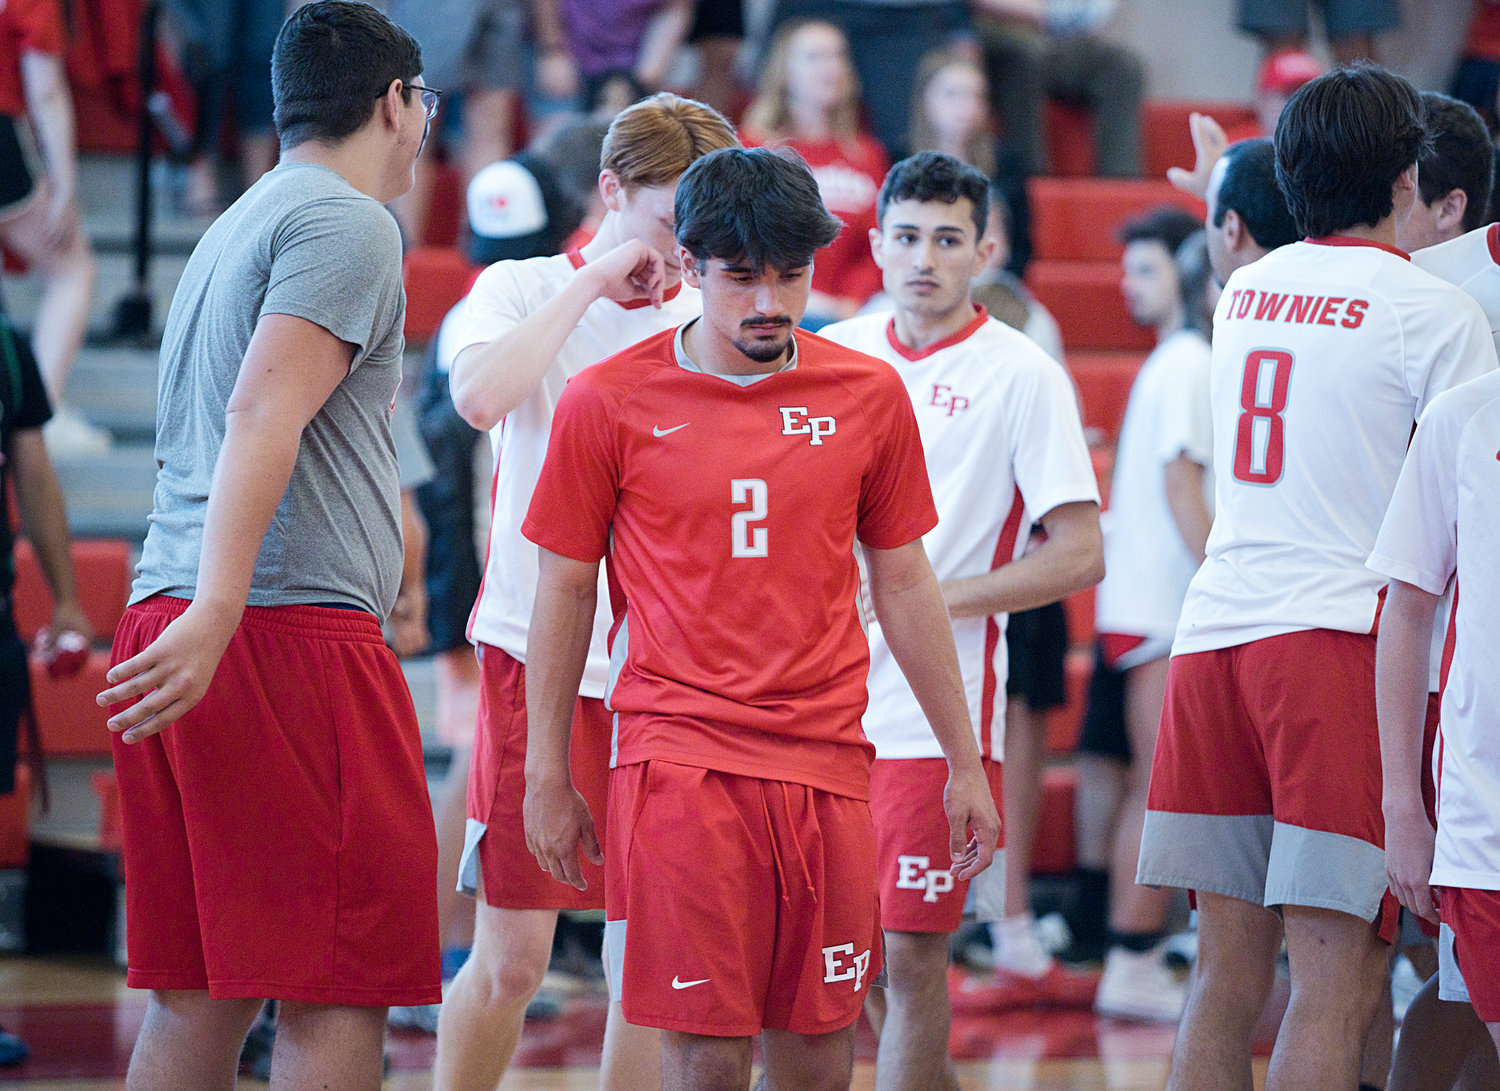 A dejected group of EPHS boys' volleyball team members walks off the court following the Townies' 3-0 loss to visiting Westerly Wednesday, June 8, in the Division II playoff semifinals.